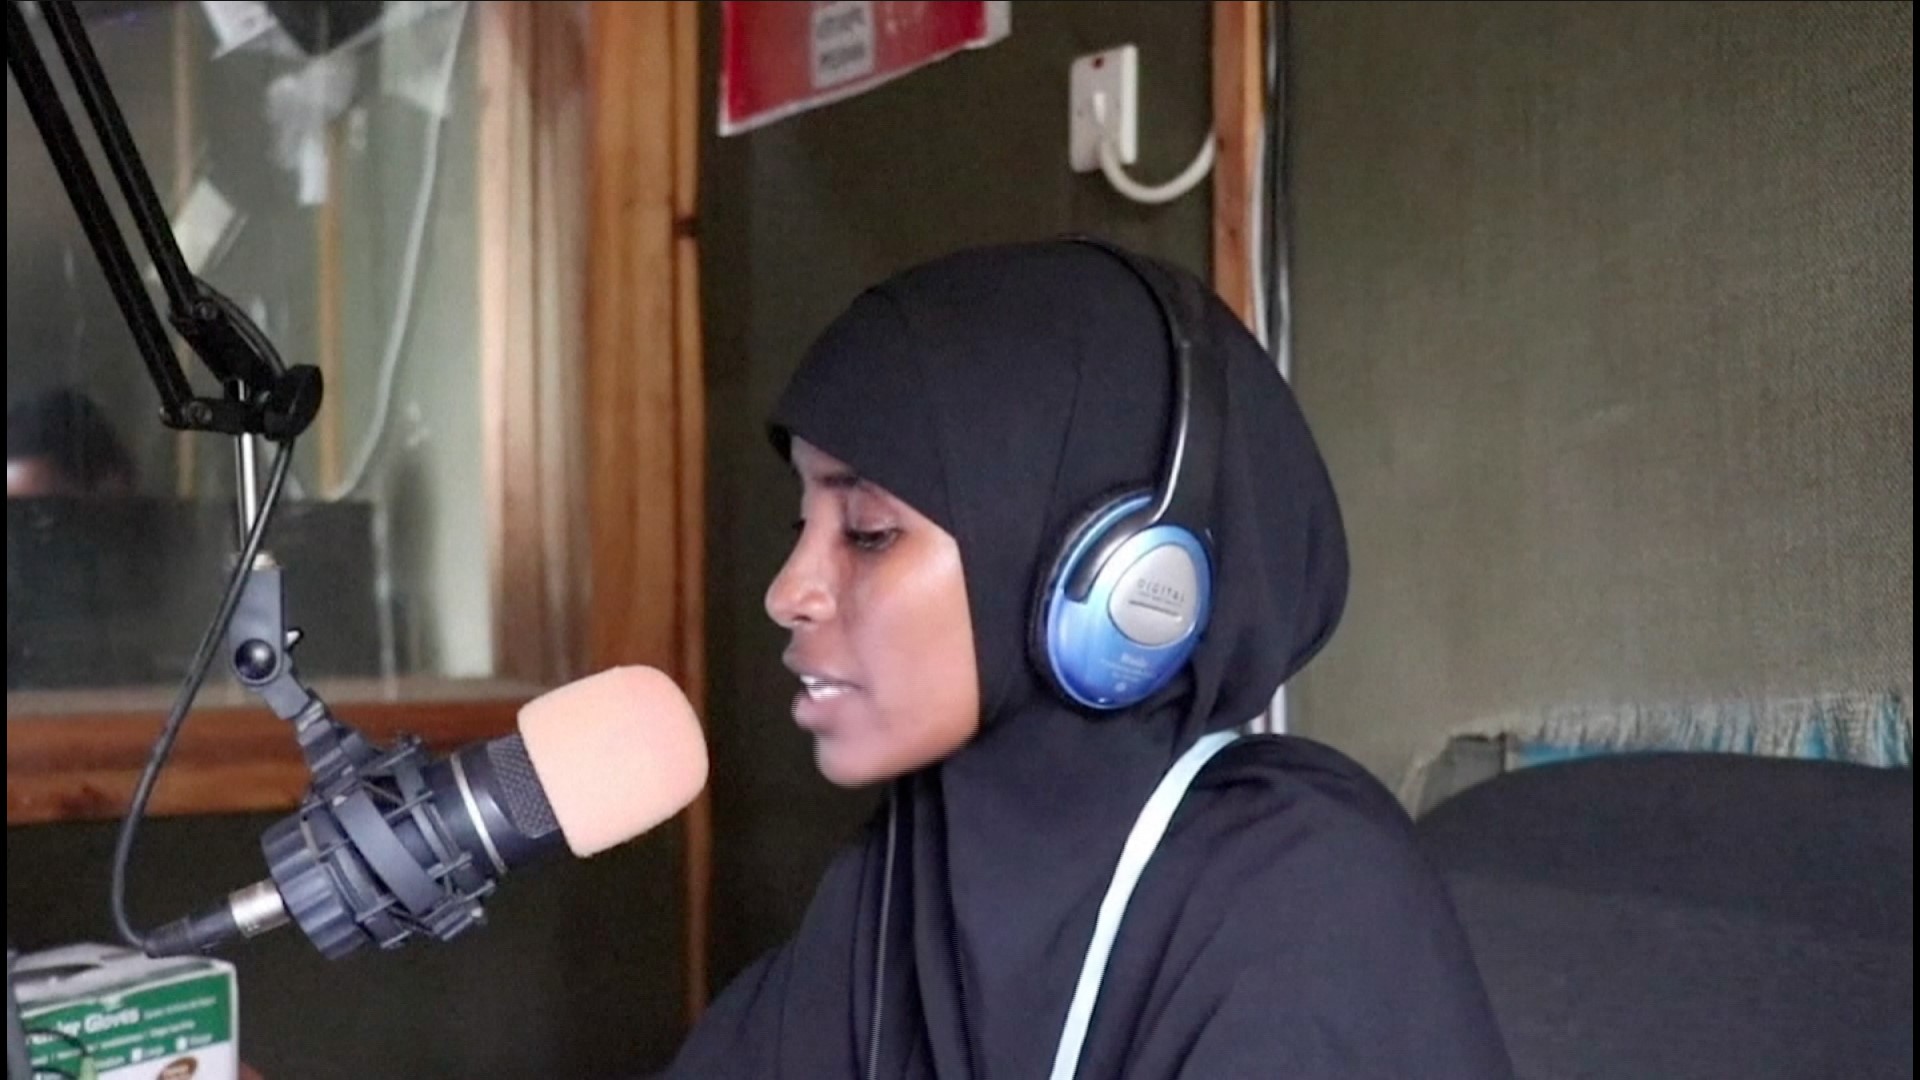 While schools in Kenya have closed amid the coronavirus pandemic, teachers at a refugee camp there have found a clever way to continue teaching students: over the community radio.